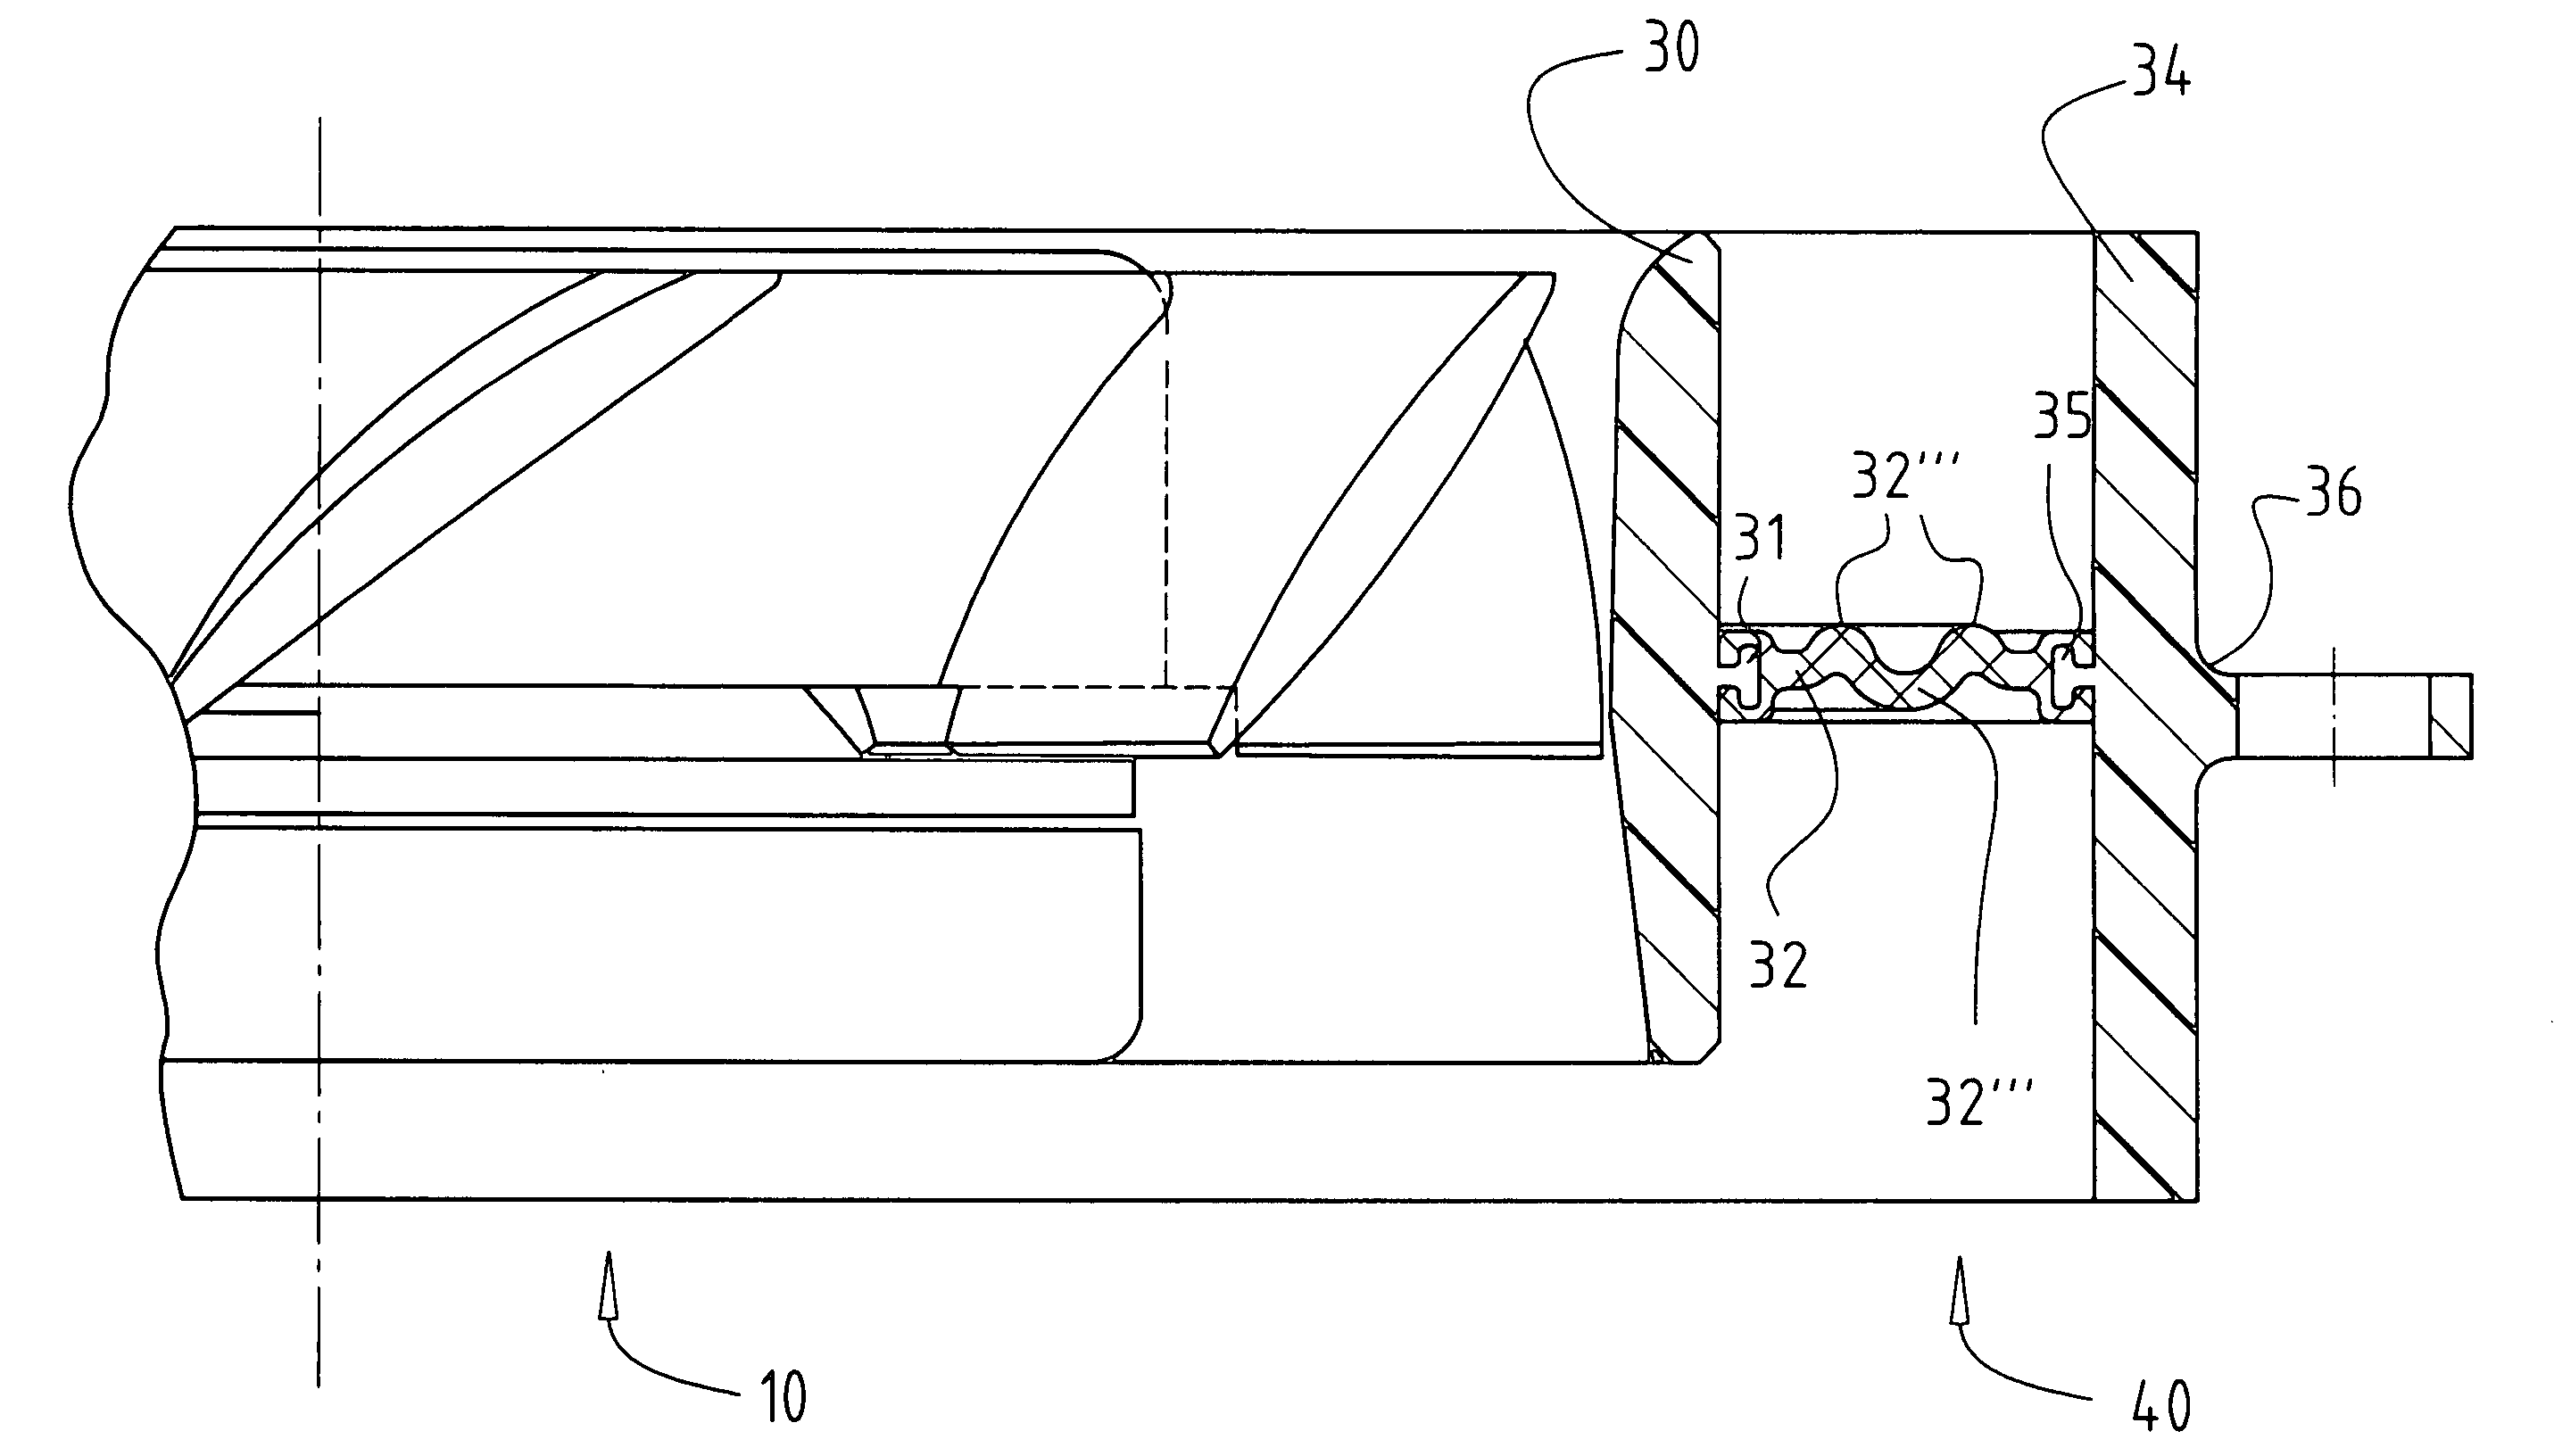 Fan mounting means and method of making the same